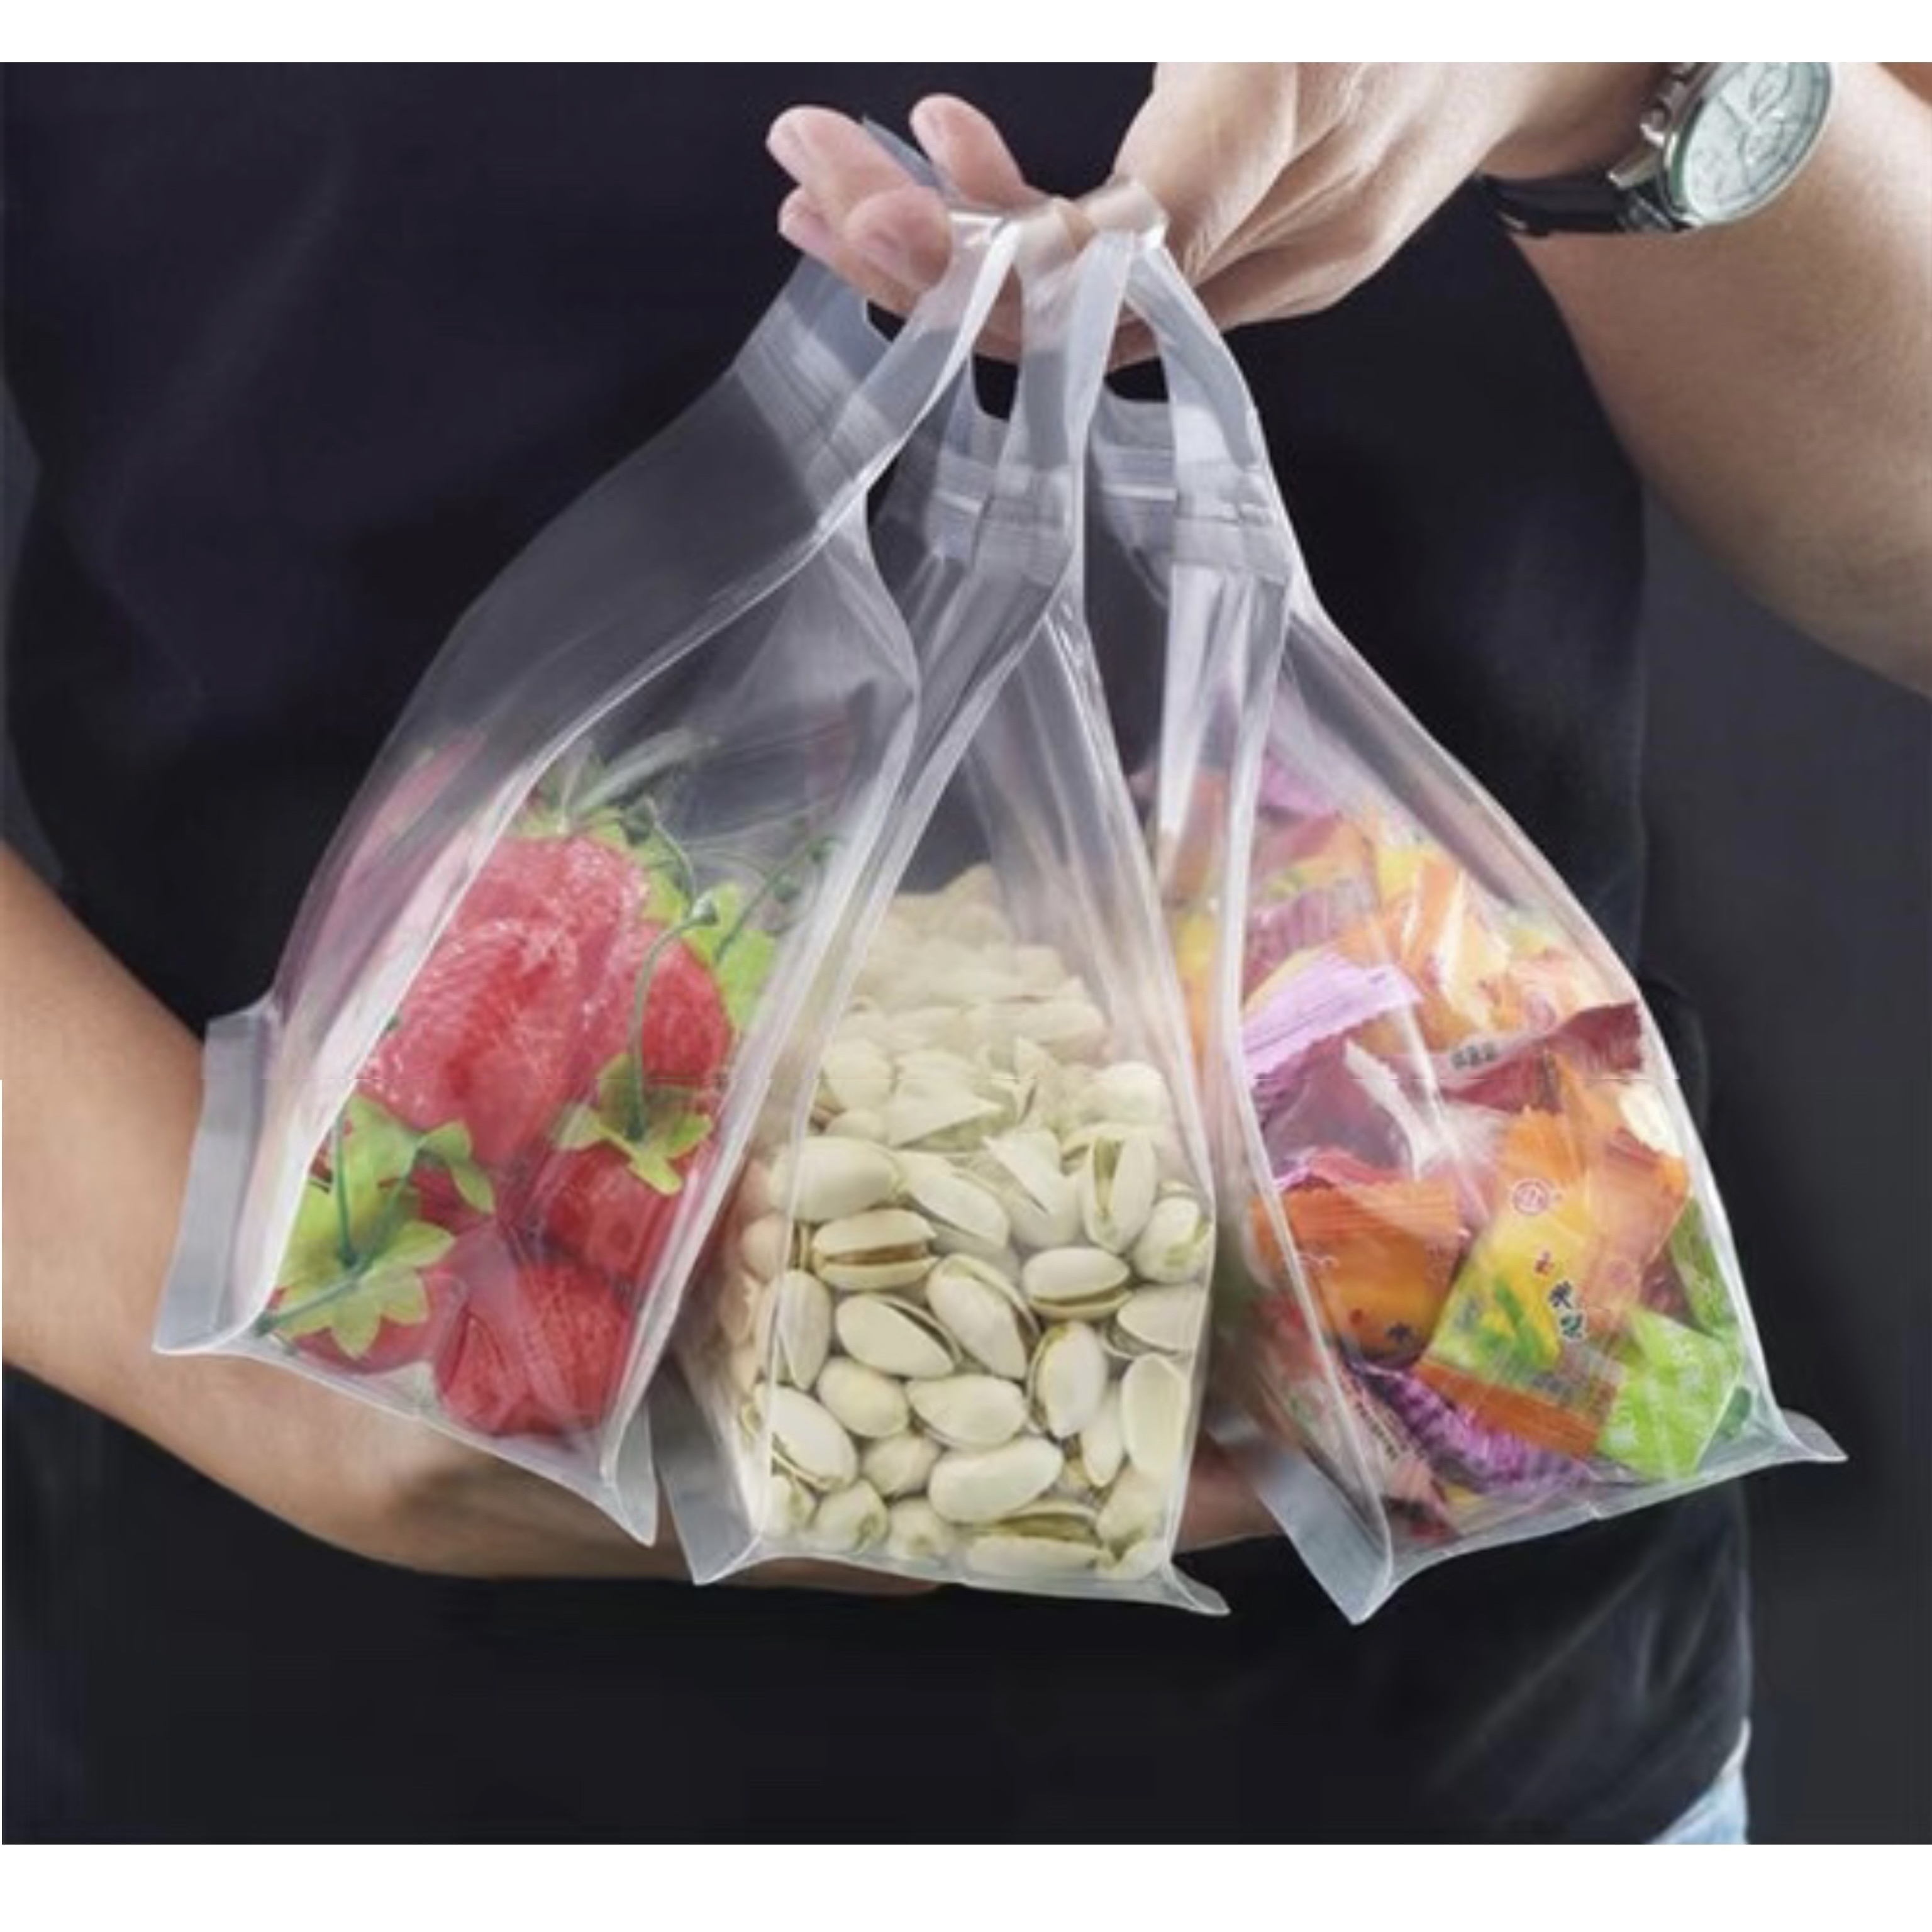 

5pcs Reusable Leakproof Food Storage Bags, For Nut Grain Vegetable Fruit And Snack, Kitchen Organizer, Anti-odor Leak Proof Freezer Bag, Storage Containers For Travel